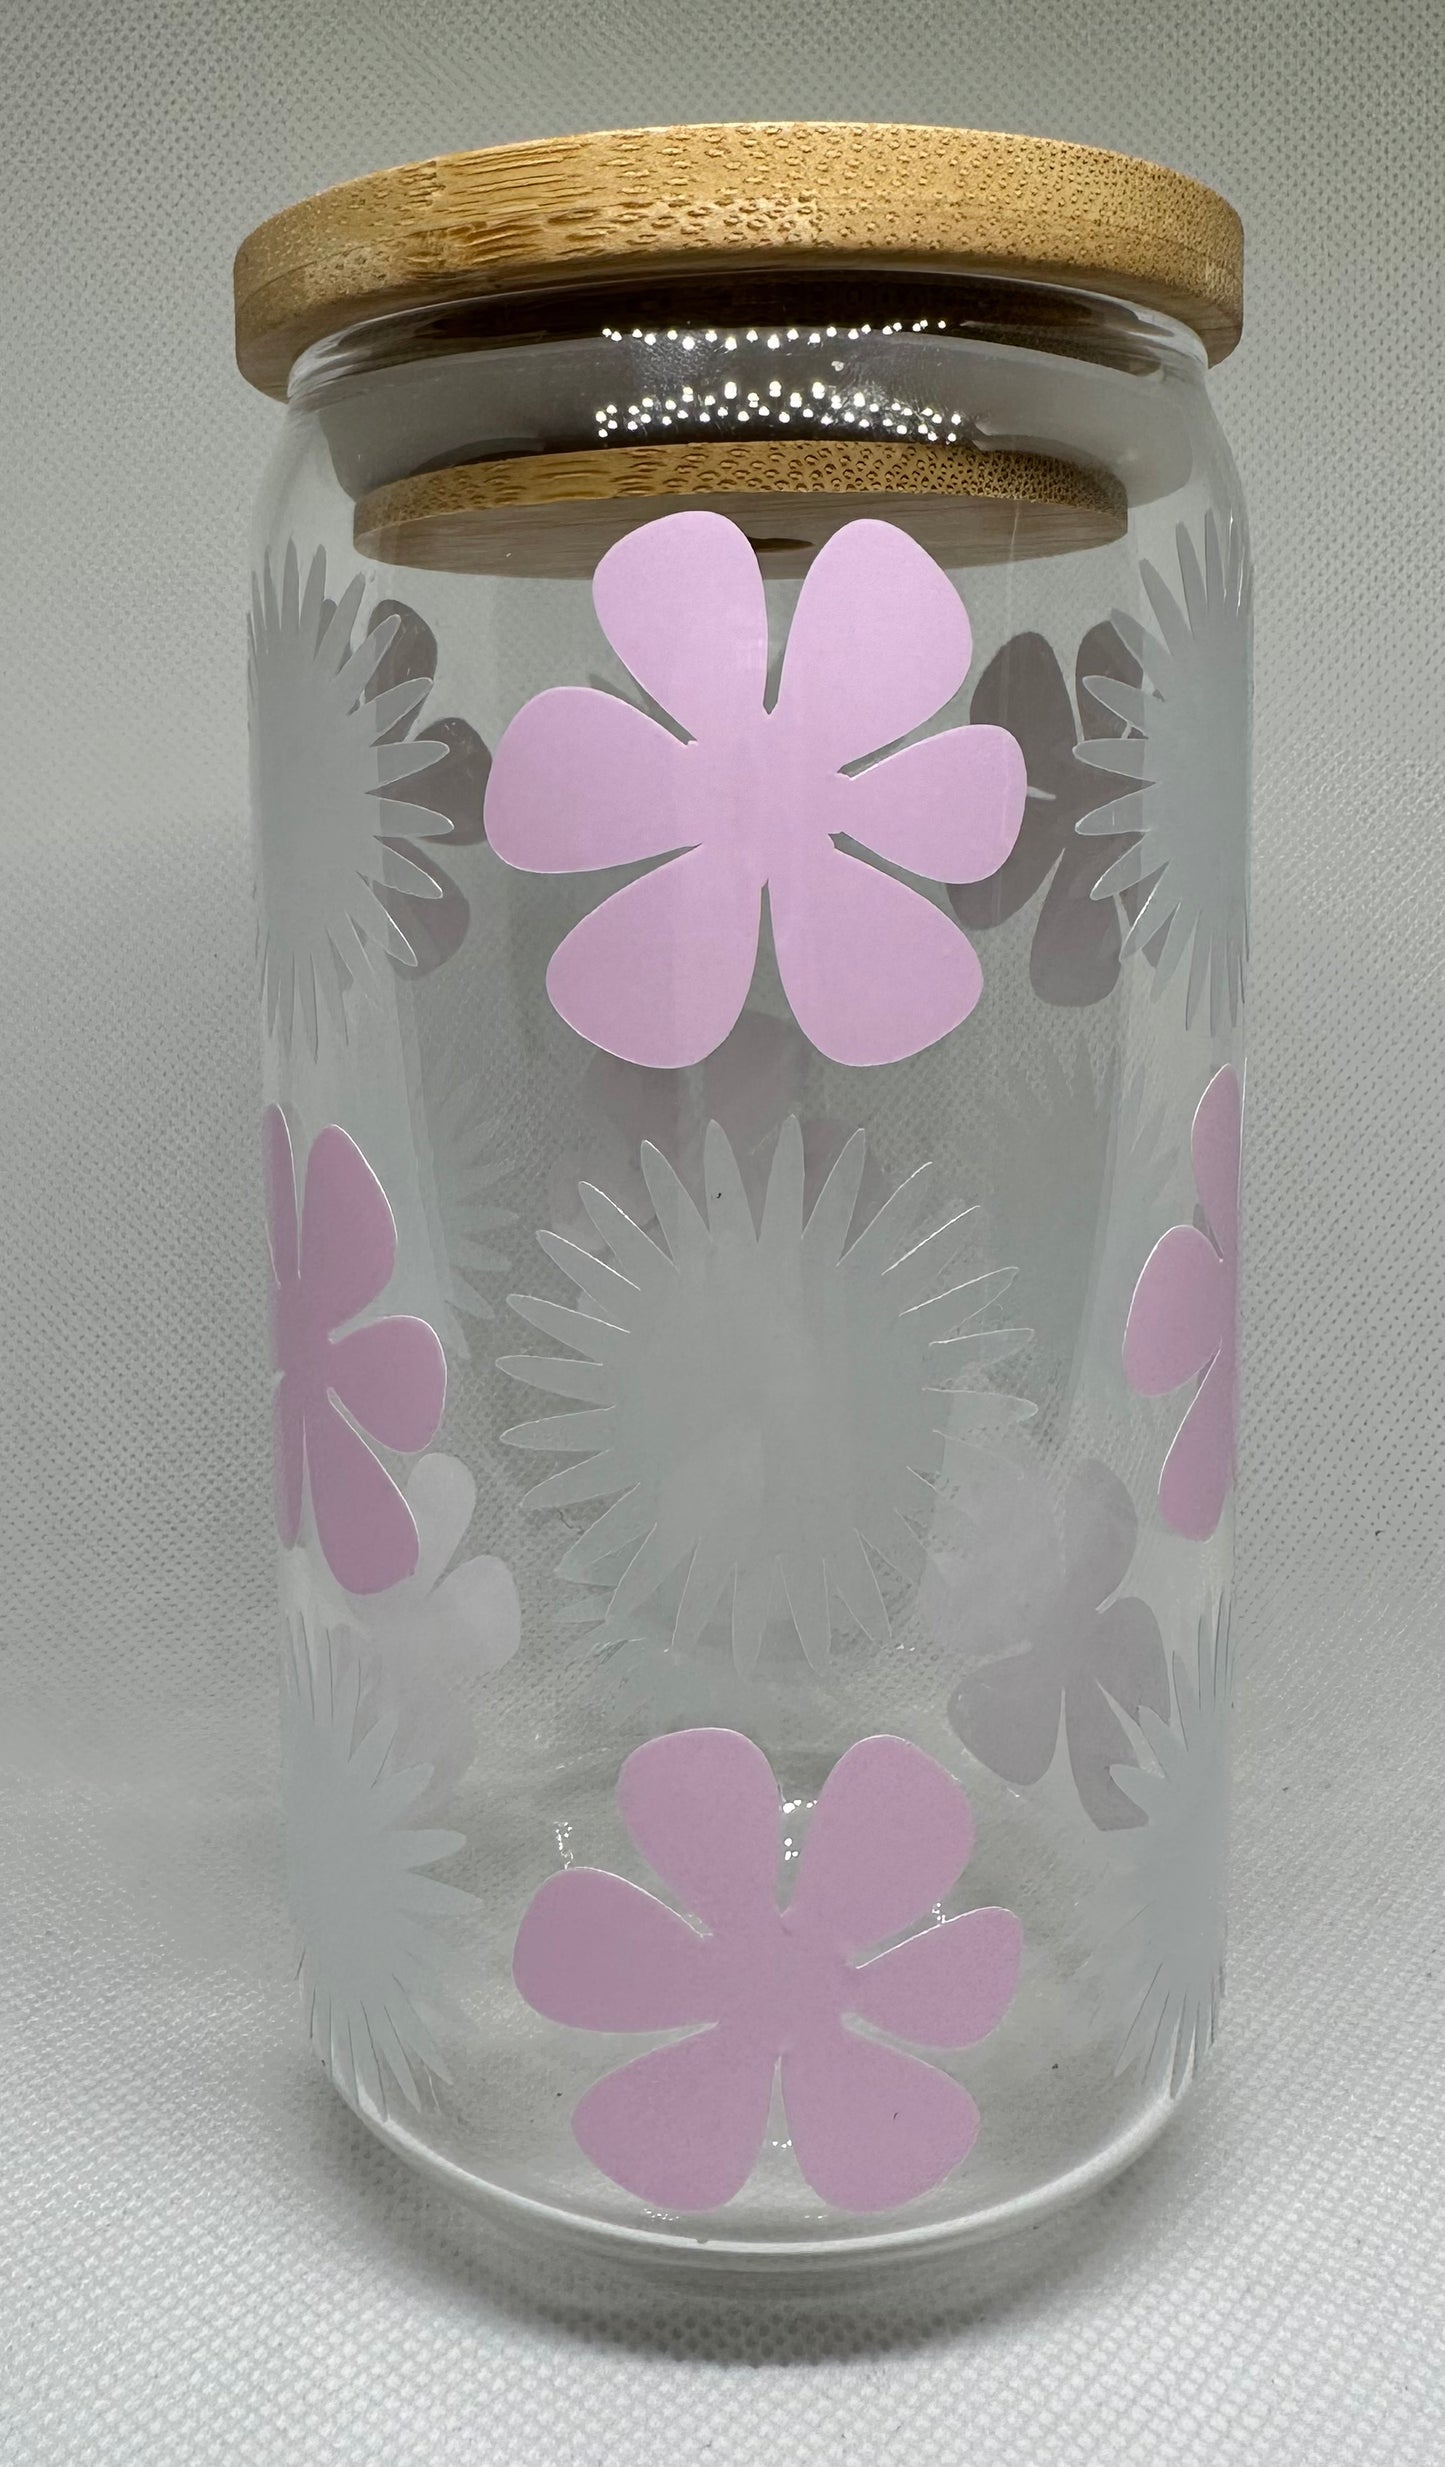 COLOR CHANGING Flowers glass with bamboo lid and straw